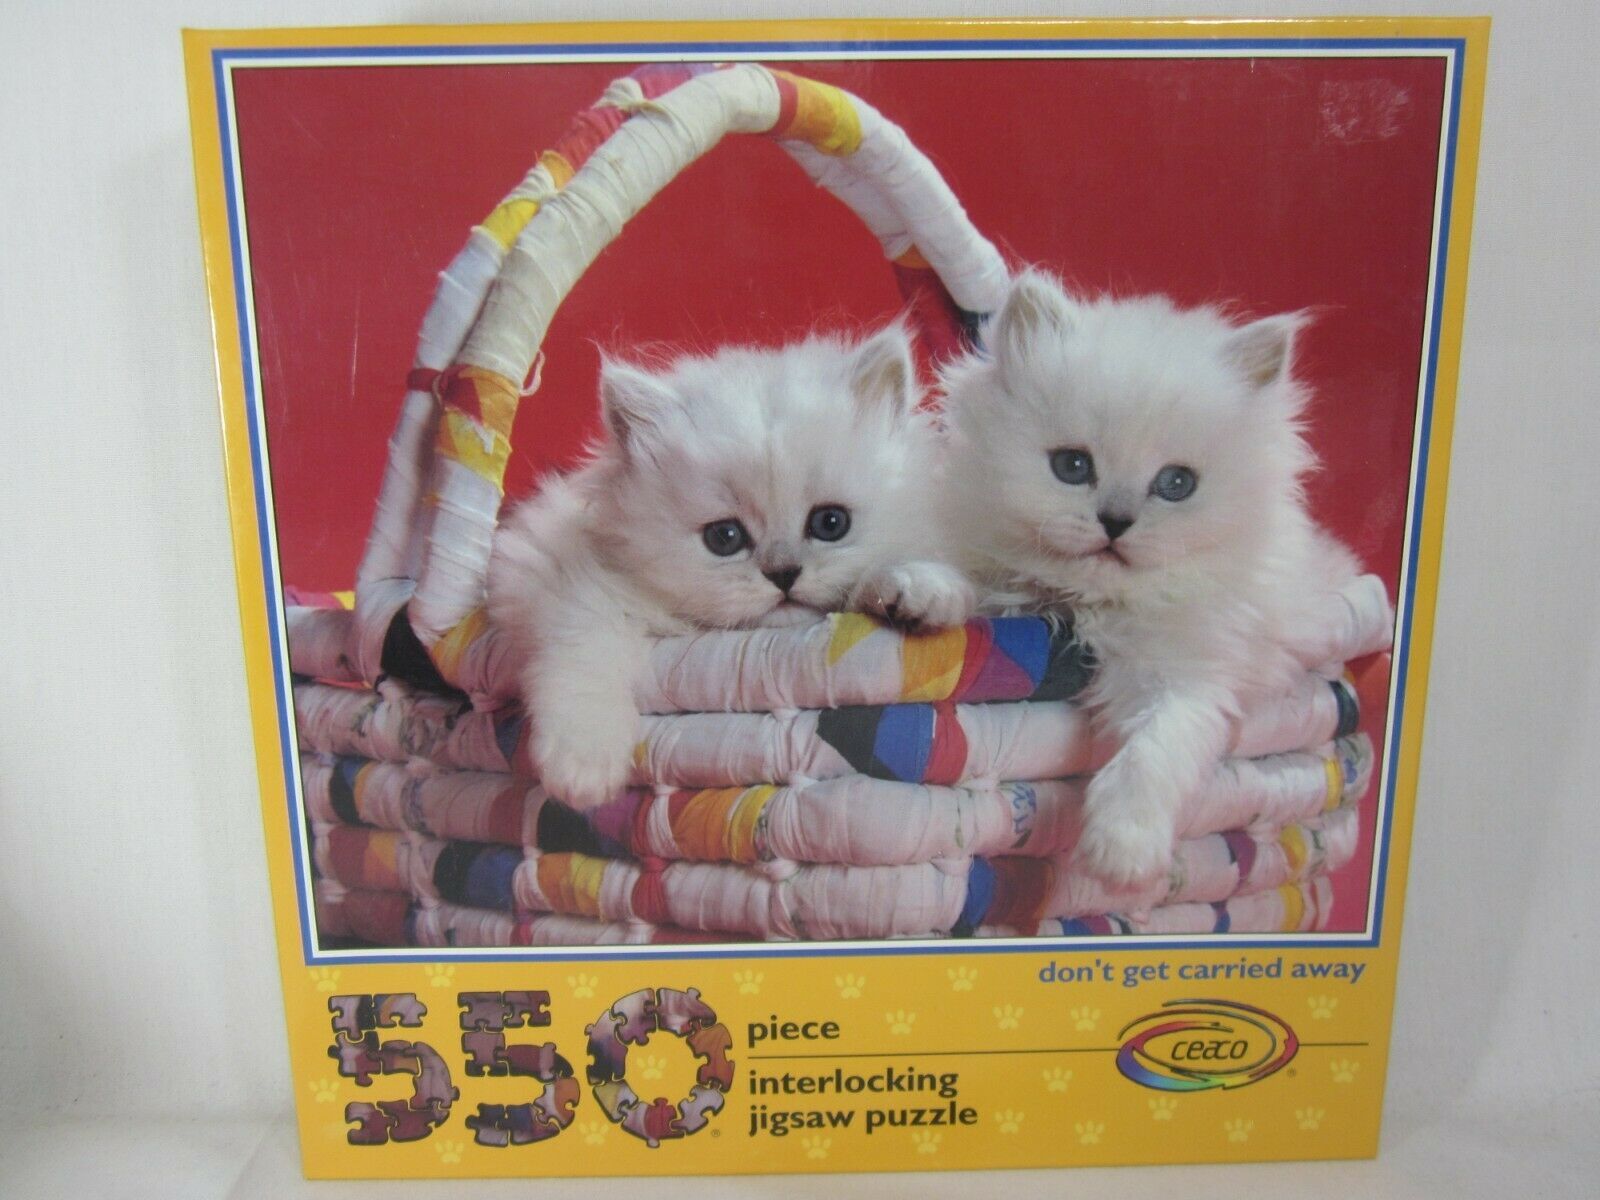 Ceaco 550 Piece Jigsaw Puzzle Don't Get Carried Away 1990 SEALED Kittens - $12.86